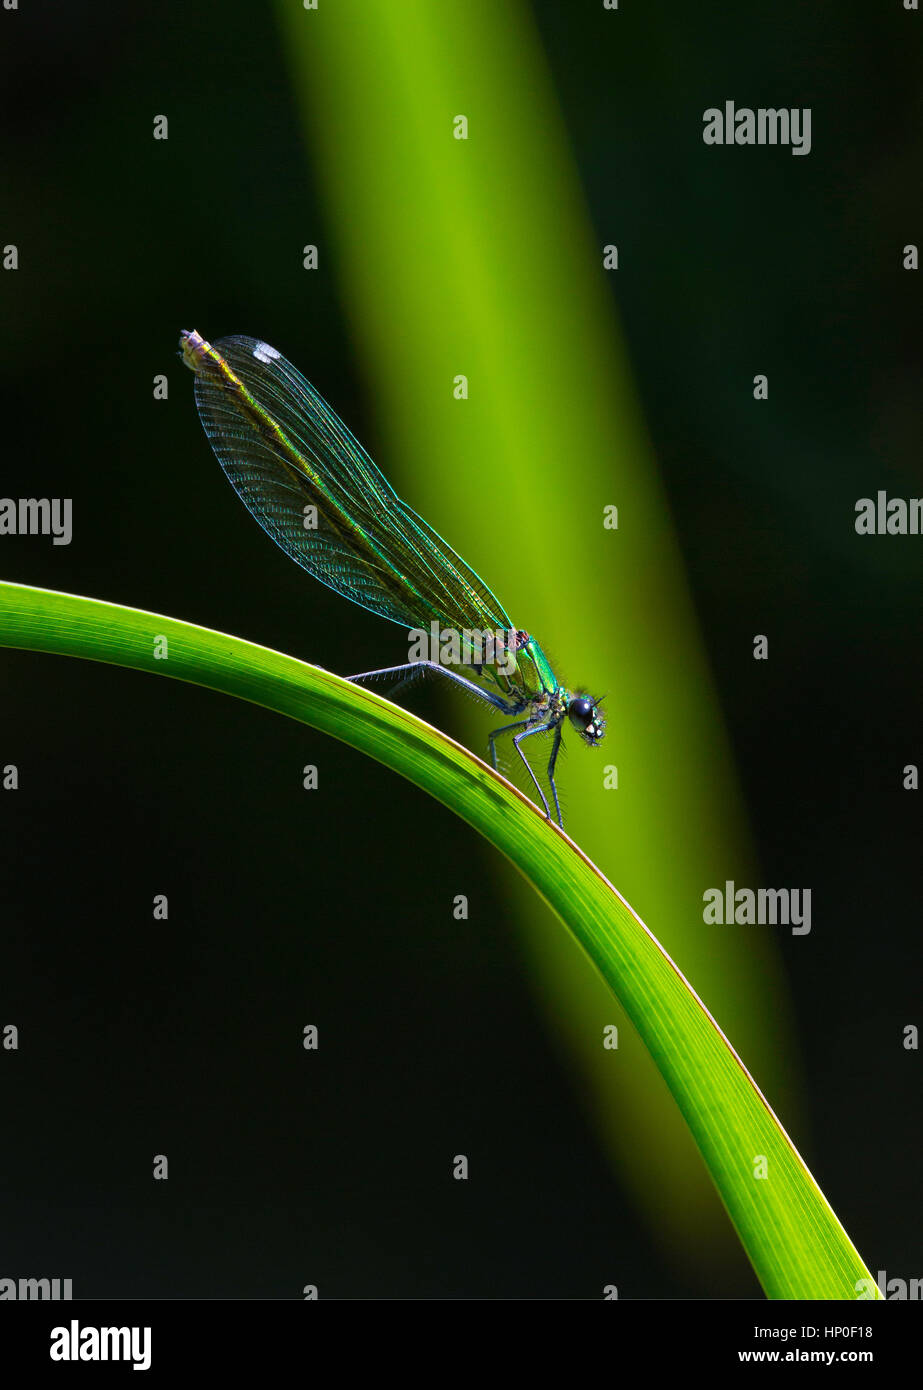 Banded Demoiselle (Calopteryx splendens) - Portrait shot of a female banded demoiselle on a bright green reed, against a black & green background Stock Photo